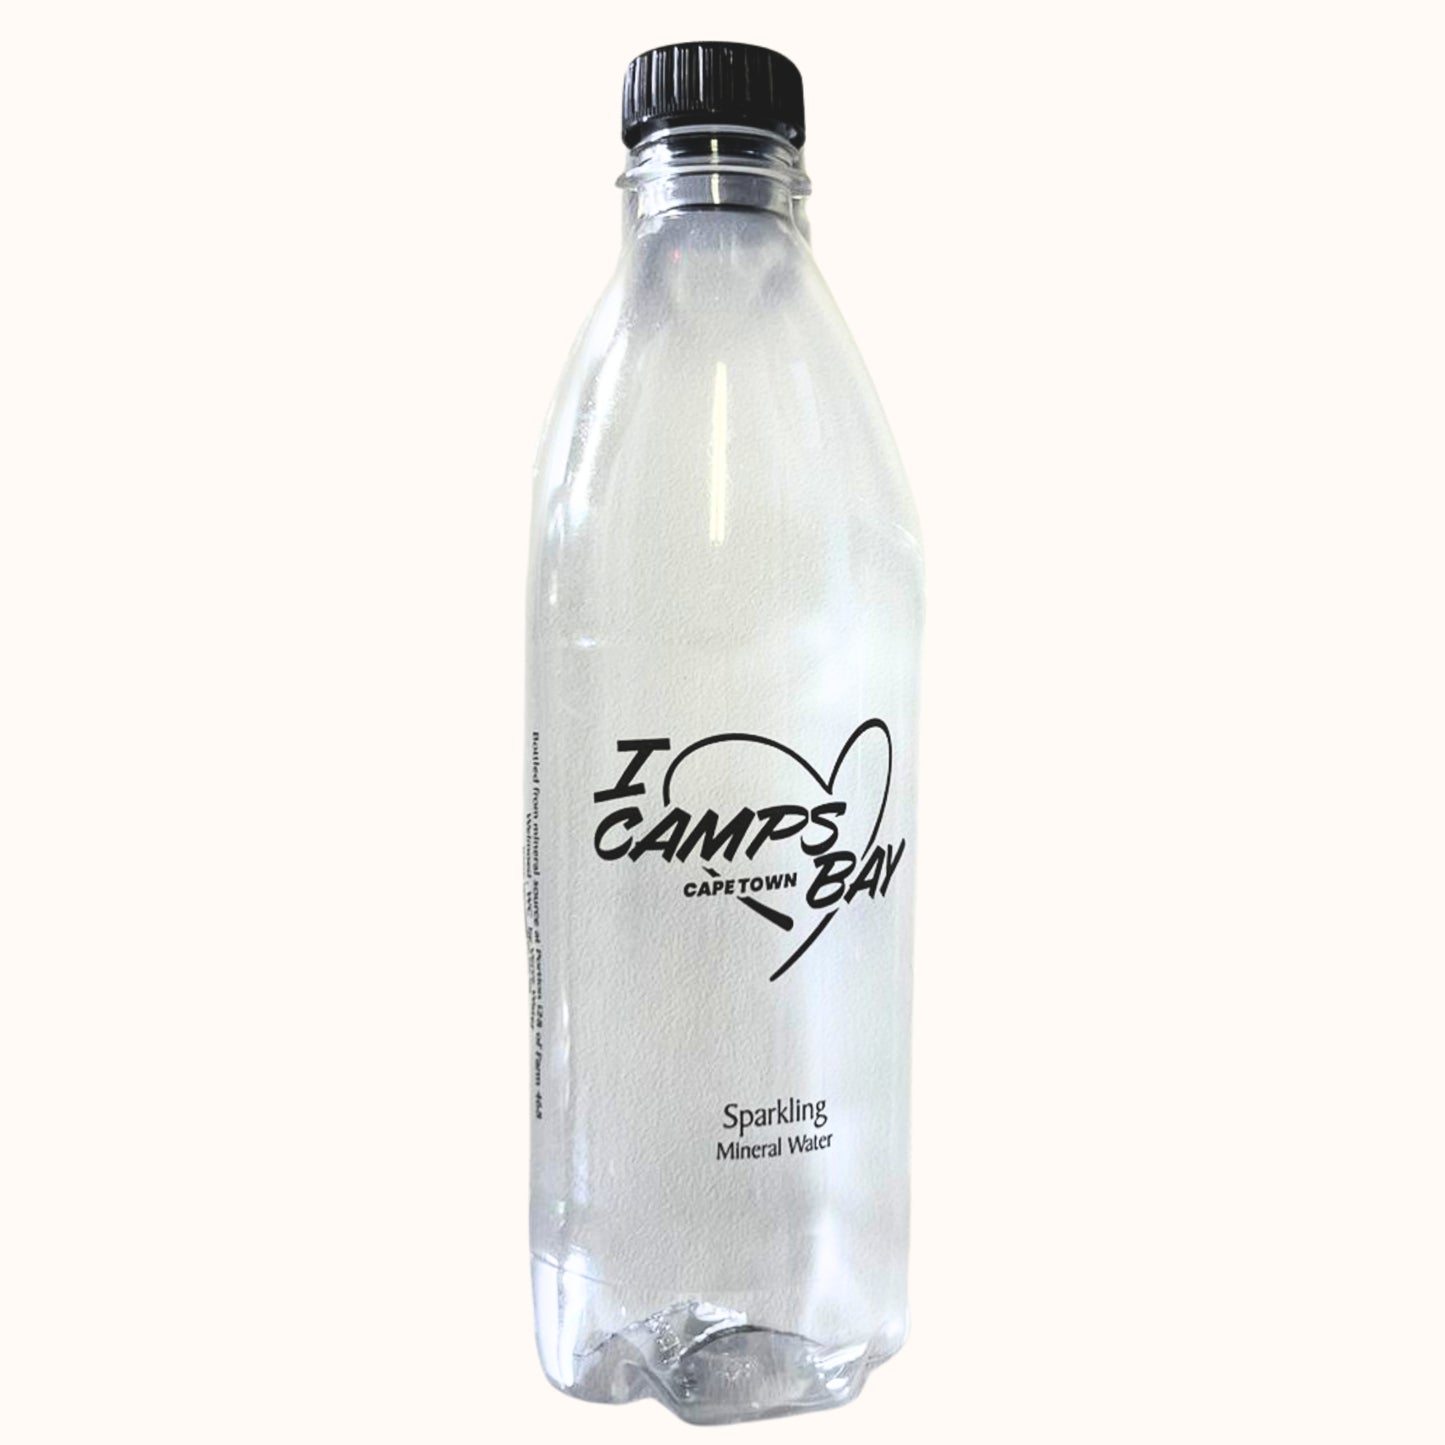 I Love Camps Bay Sparkling Water 500ml x 6